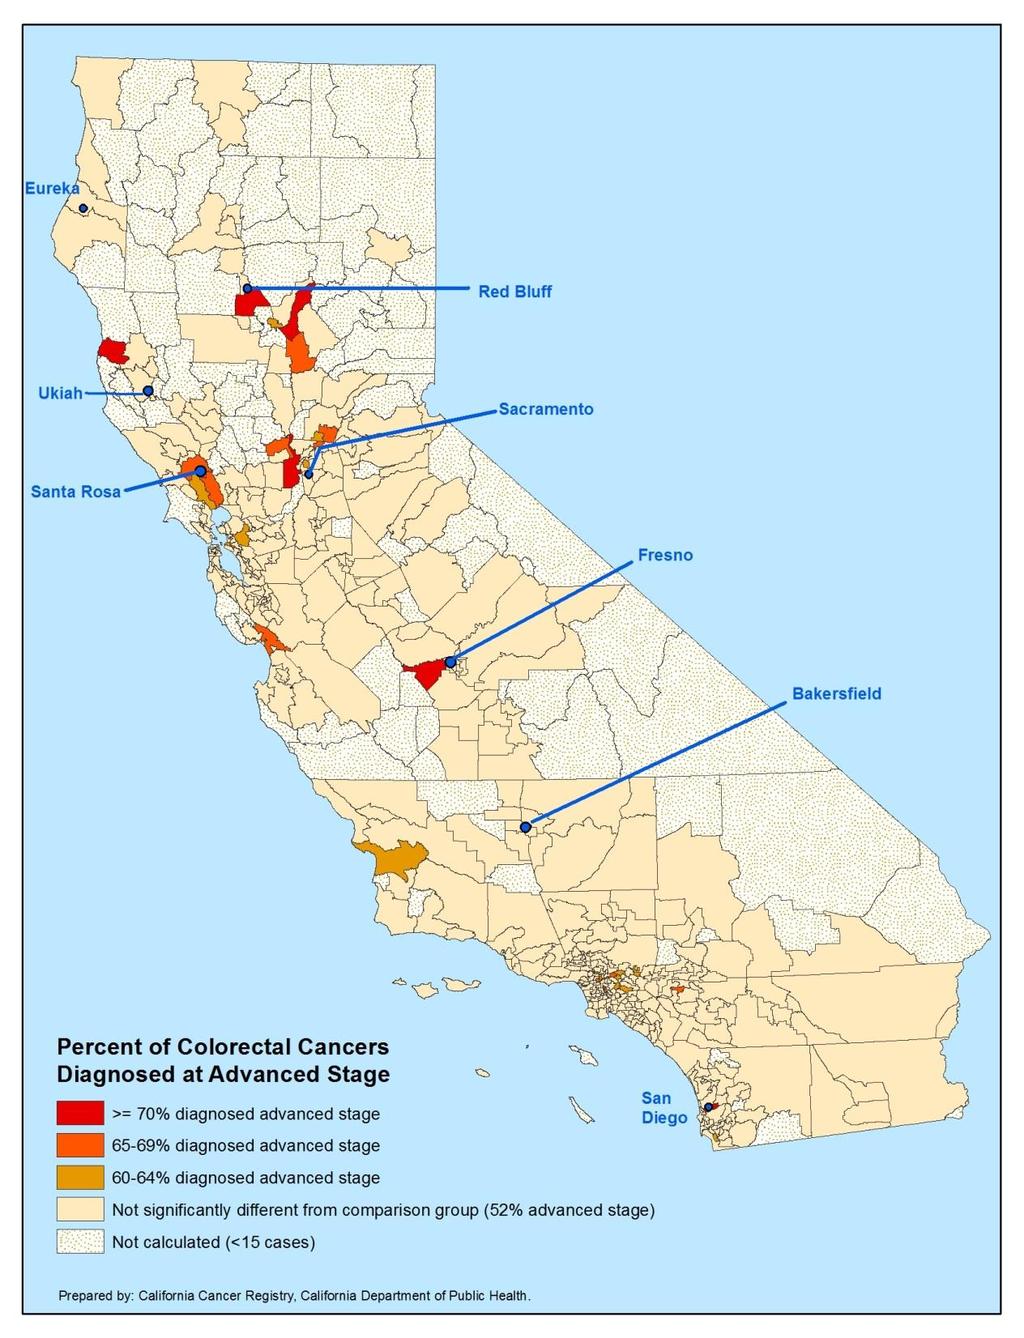 Advanced stage colorectal cancer in California communities among men and women 50 years and older, 2007-2011 Dark red: 70% or more of cases diagnosed at advanced stage Dark Orange: 65-69% of cases